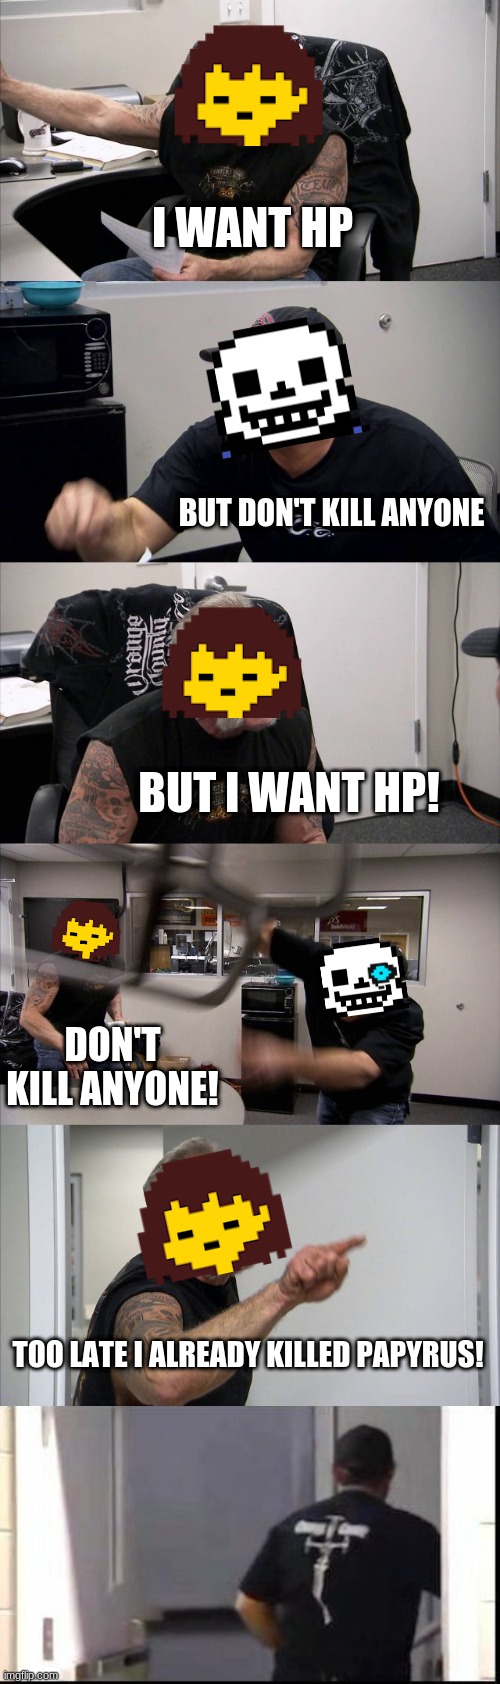 But i want hp | I WANT HP; BUT DON'T KILL ANYONE; BUT I WANT HP! DON'T KILL ANYONE! TOO LATE I ALREADY KILLED PAPYRUS! | image tagged in memes,american chopper argument,american chopper argue argument sidebyside | made w/ Imgflip meme maker